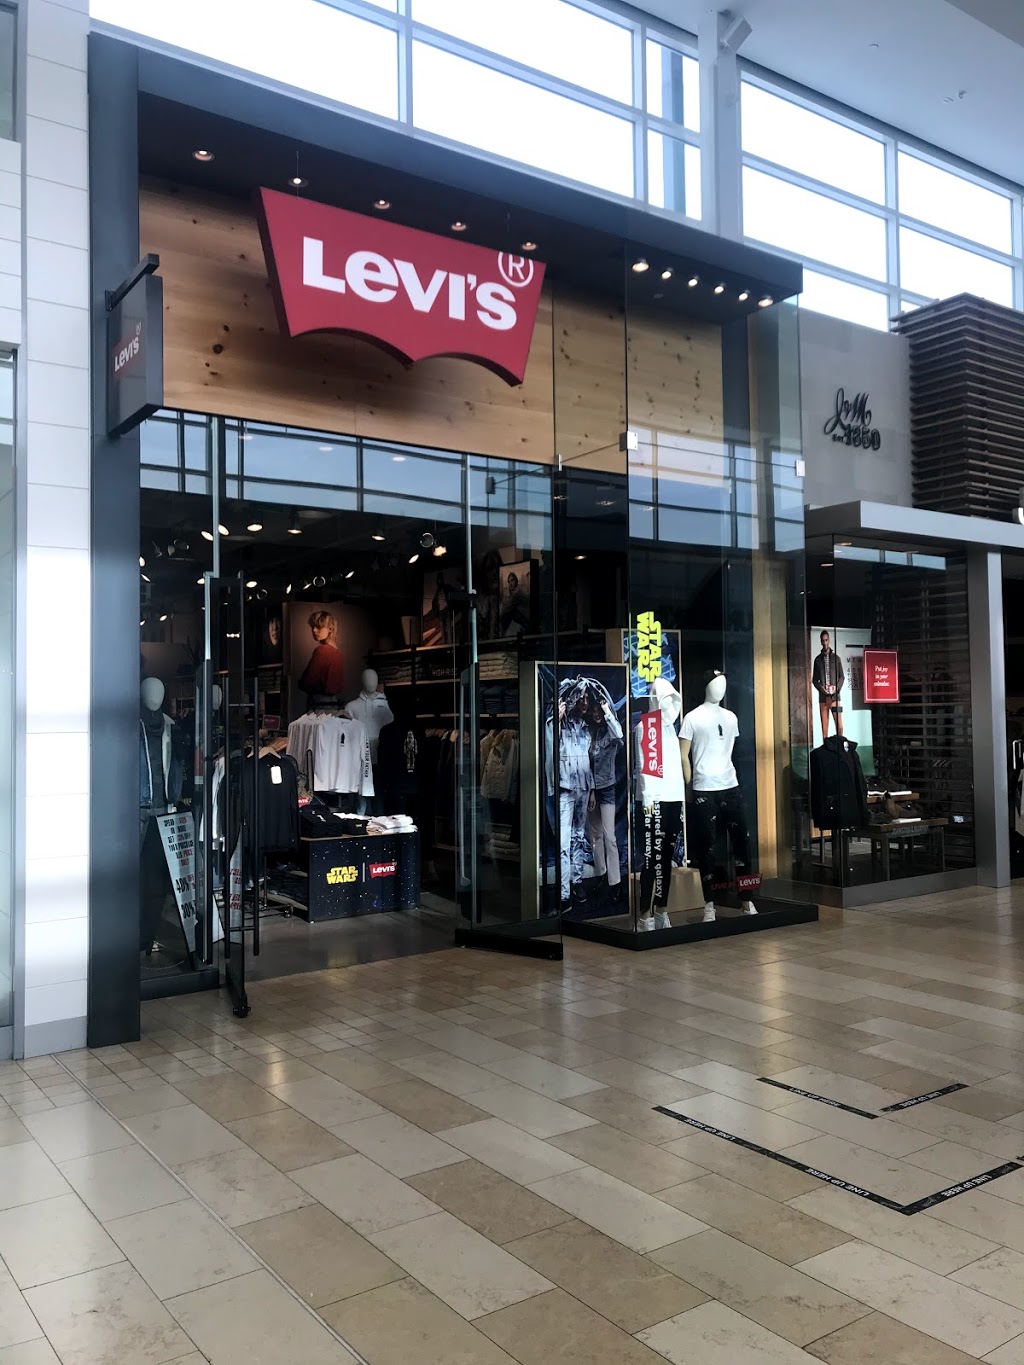 levis yorkdale mall